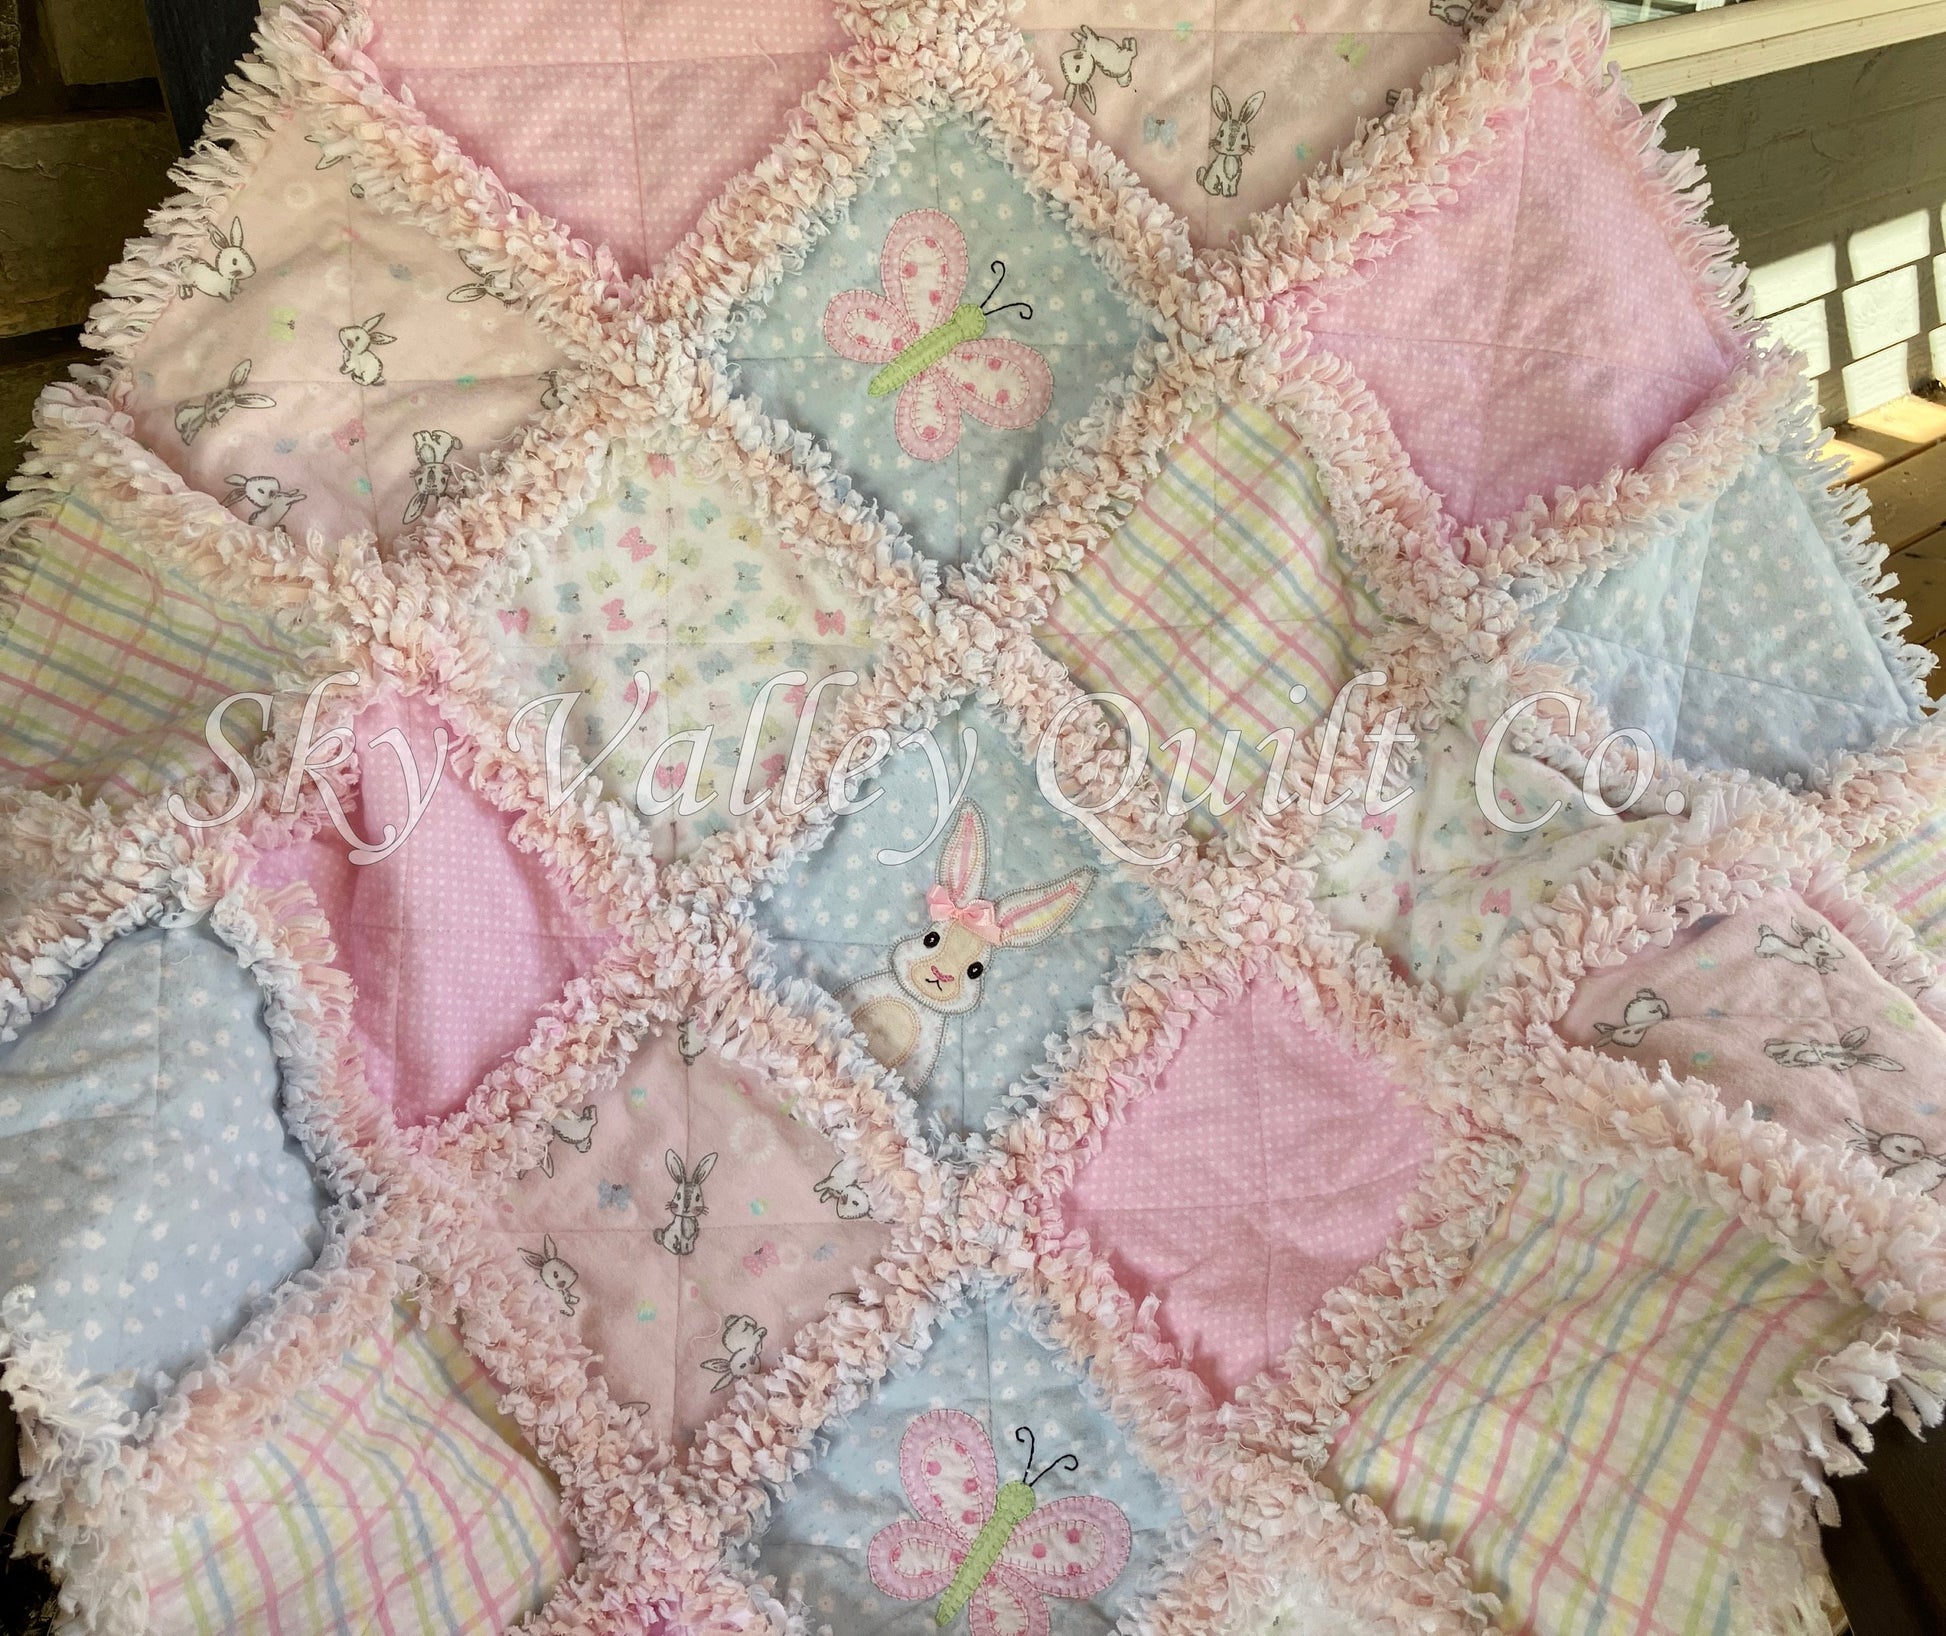 Pre cut Rag Quilt KIT-Sweet bunnies and butterflies, traditional Pastel Pink and blue flannel with diecuts!